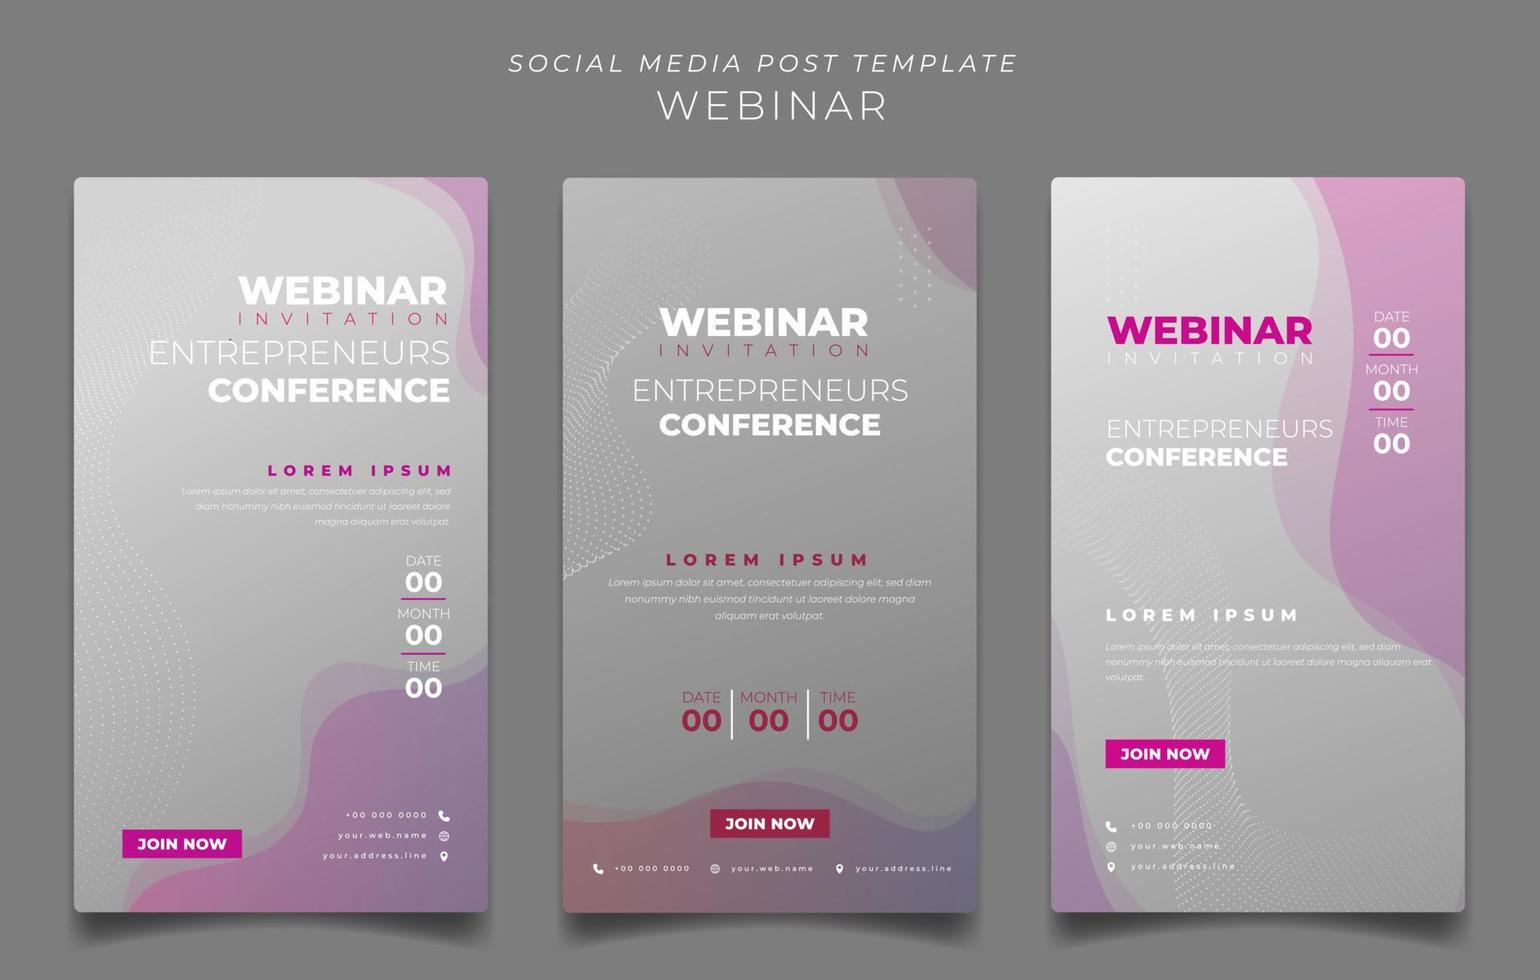 Social media template with gray and purple background for webinar invitation or advertising design vector